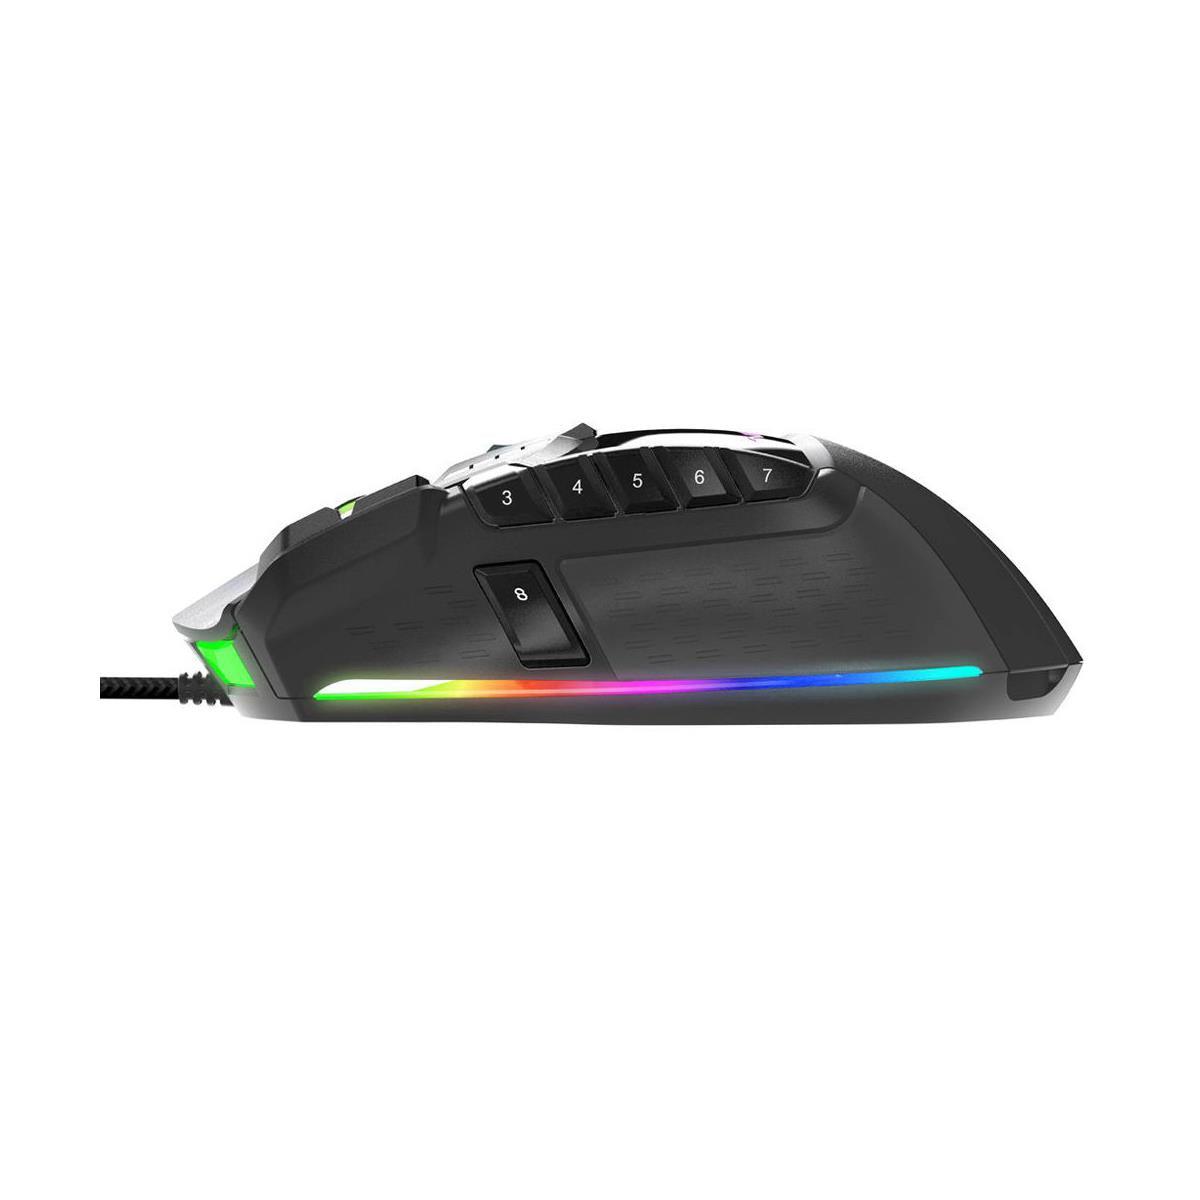 Patriot Viper V570 Blackout Edition RGB Laser Gaming Mouse - Wired